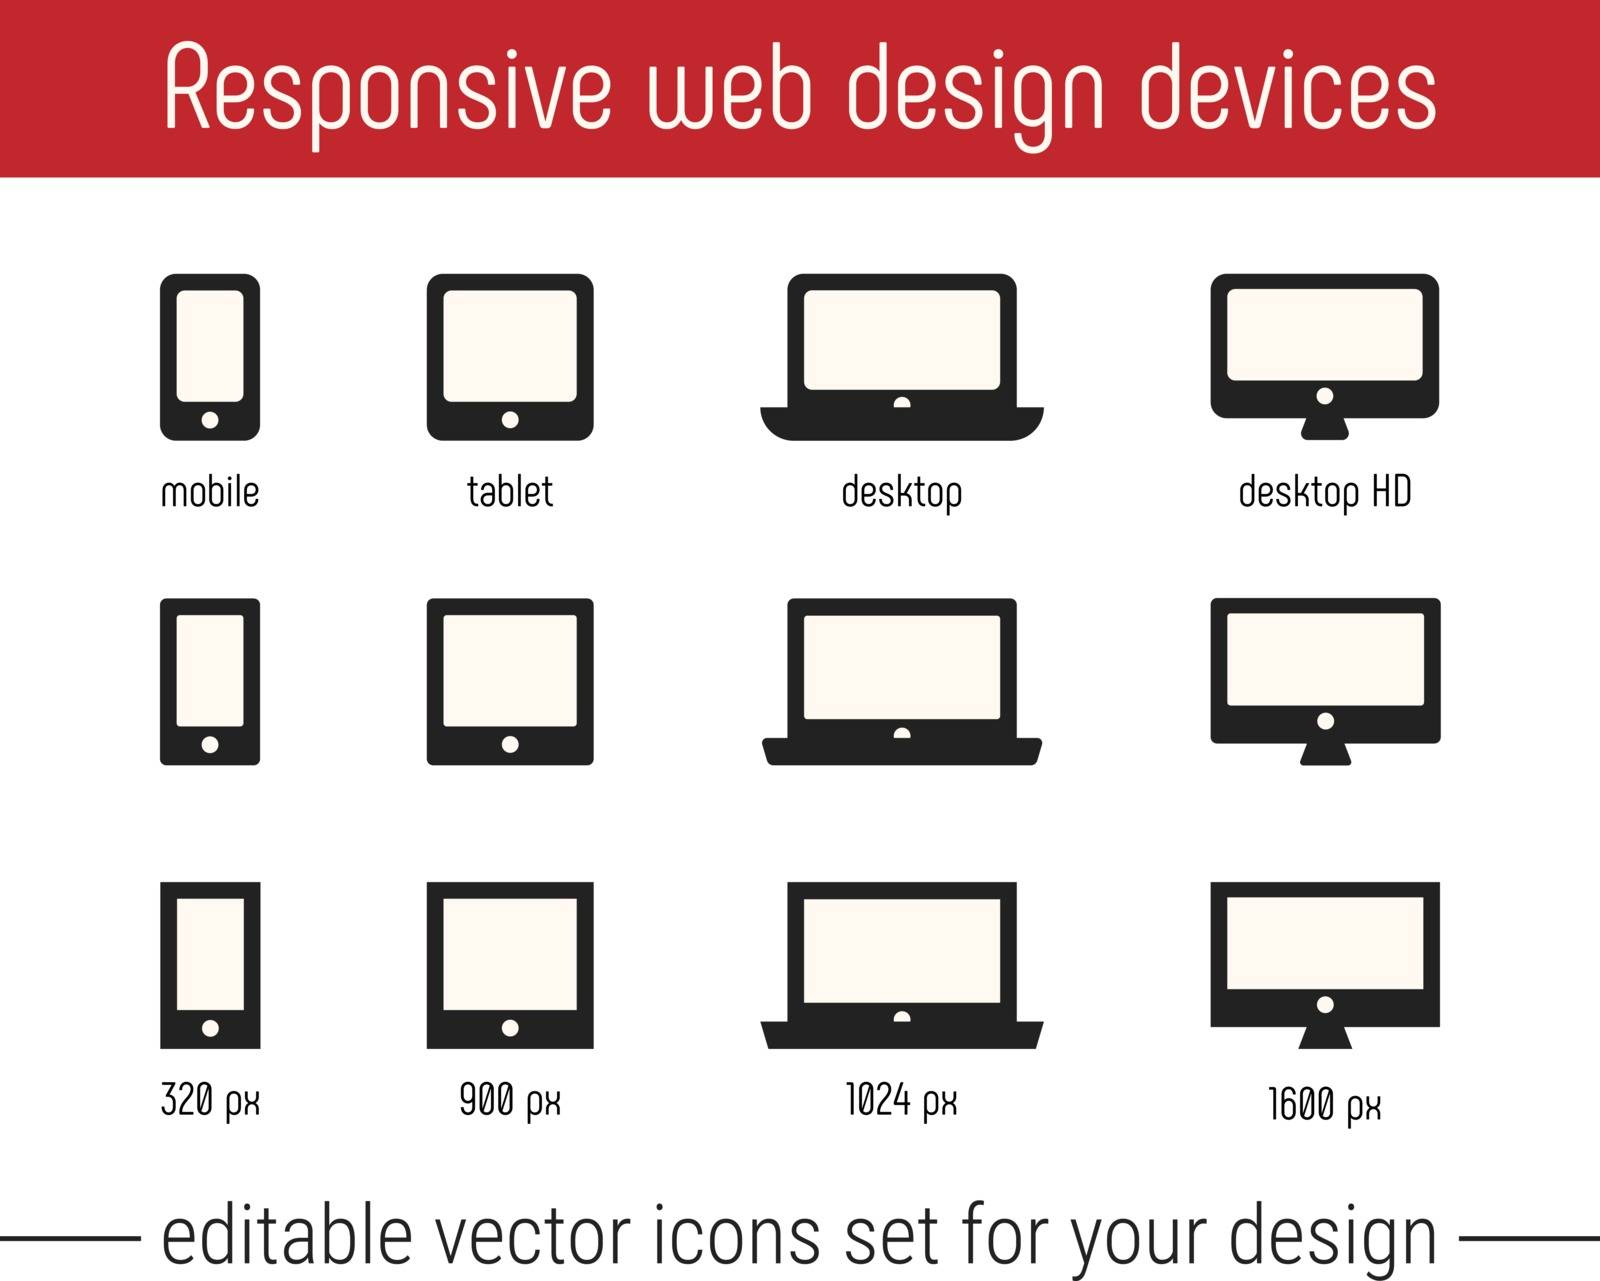 Responsive icon vector images. Flat responsive design icons vector. Responsive icon vector images set for website, app design. Responsive design icons vector set with mobile, tablet, desktop devices by HearthFaerie